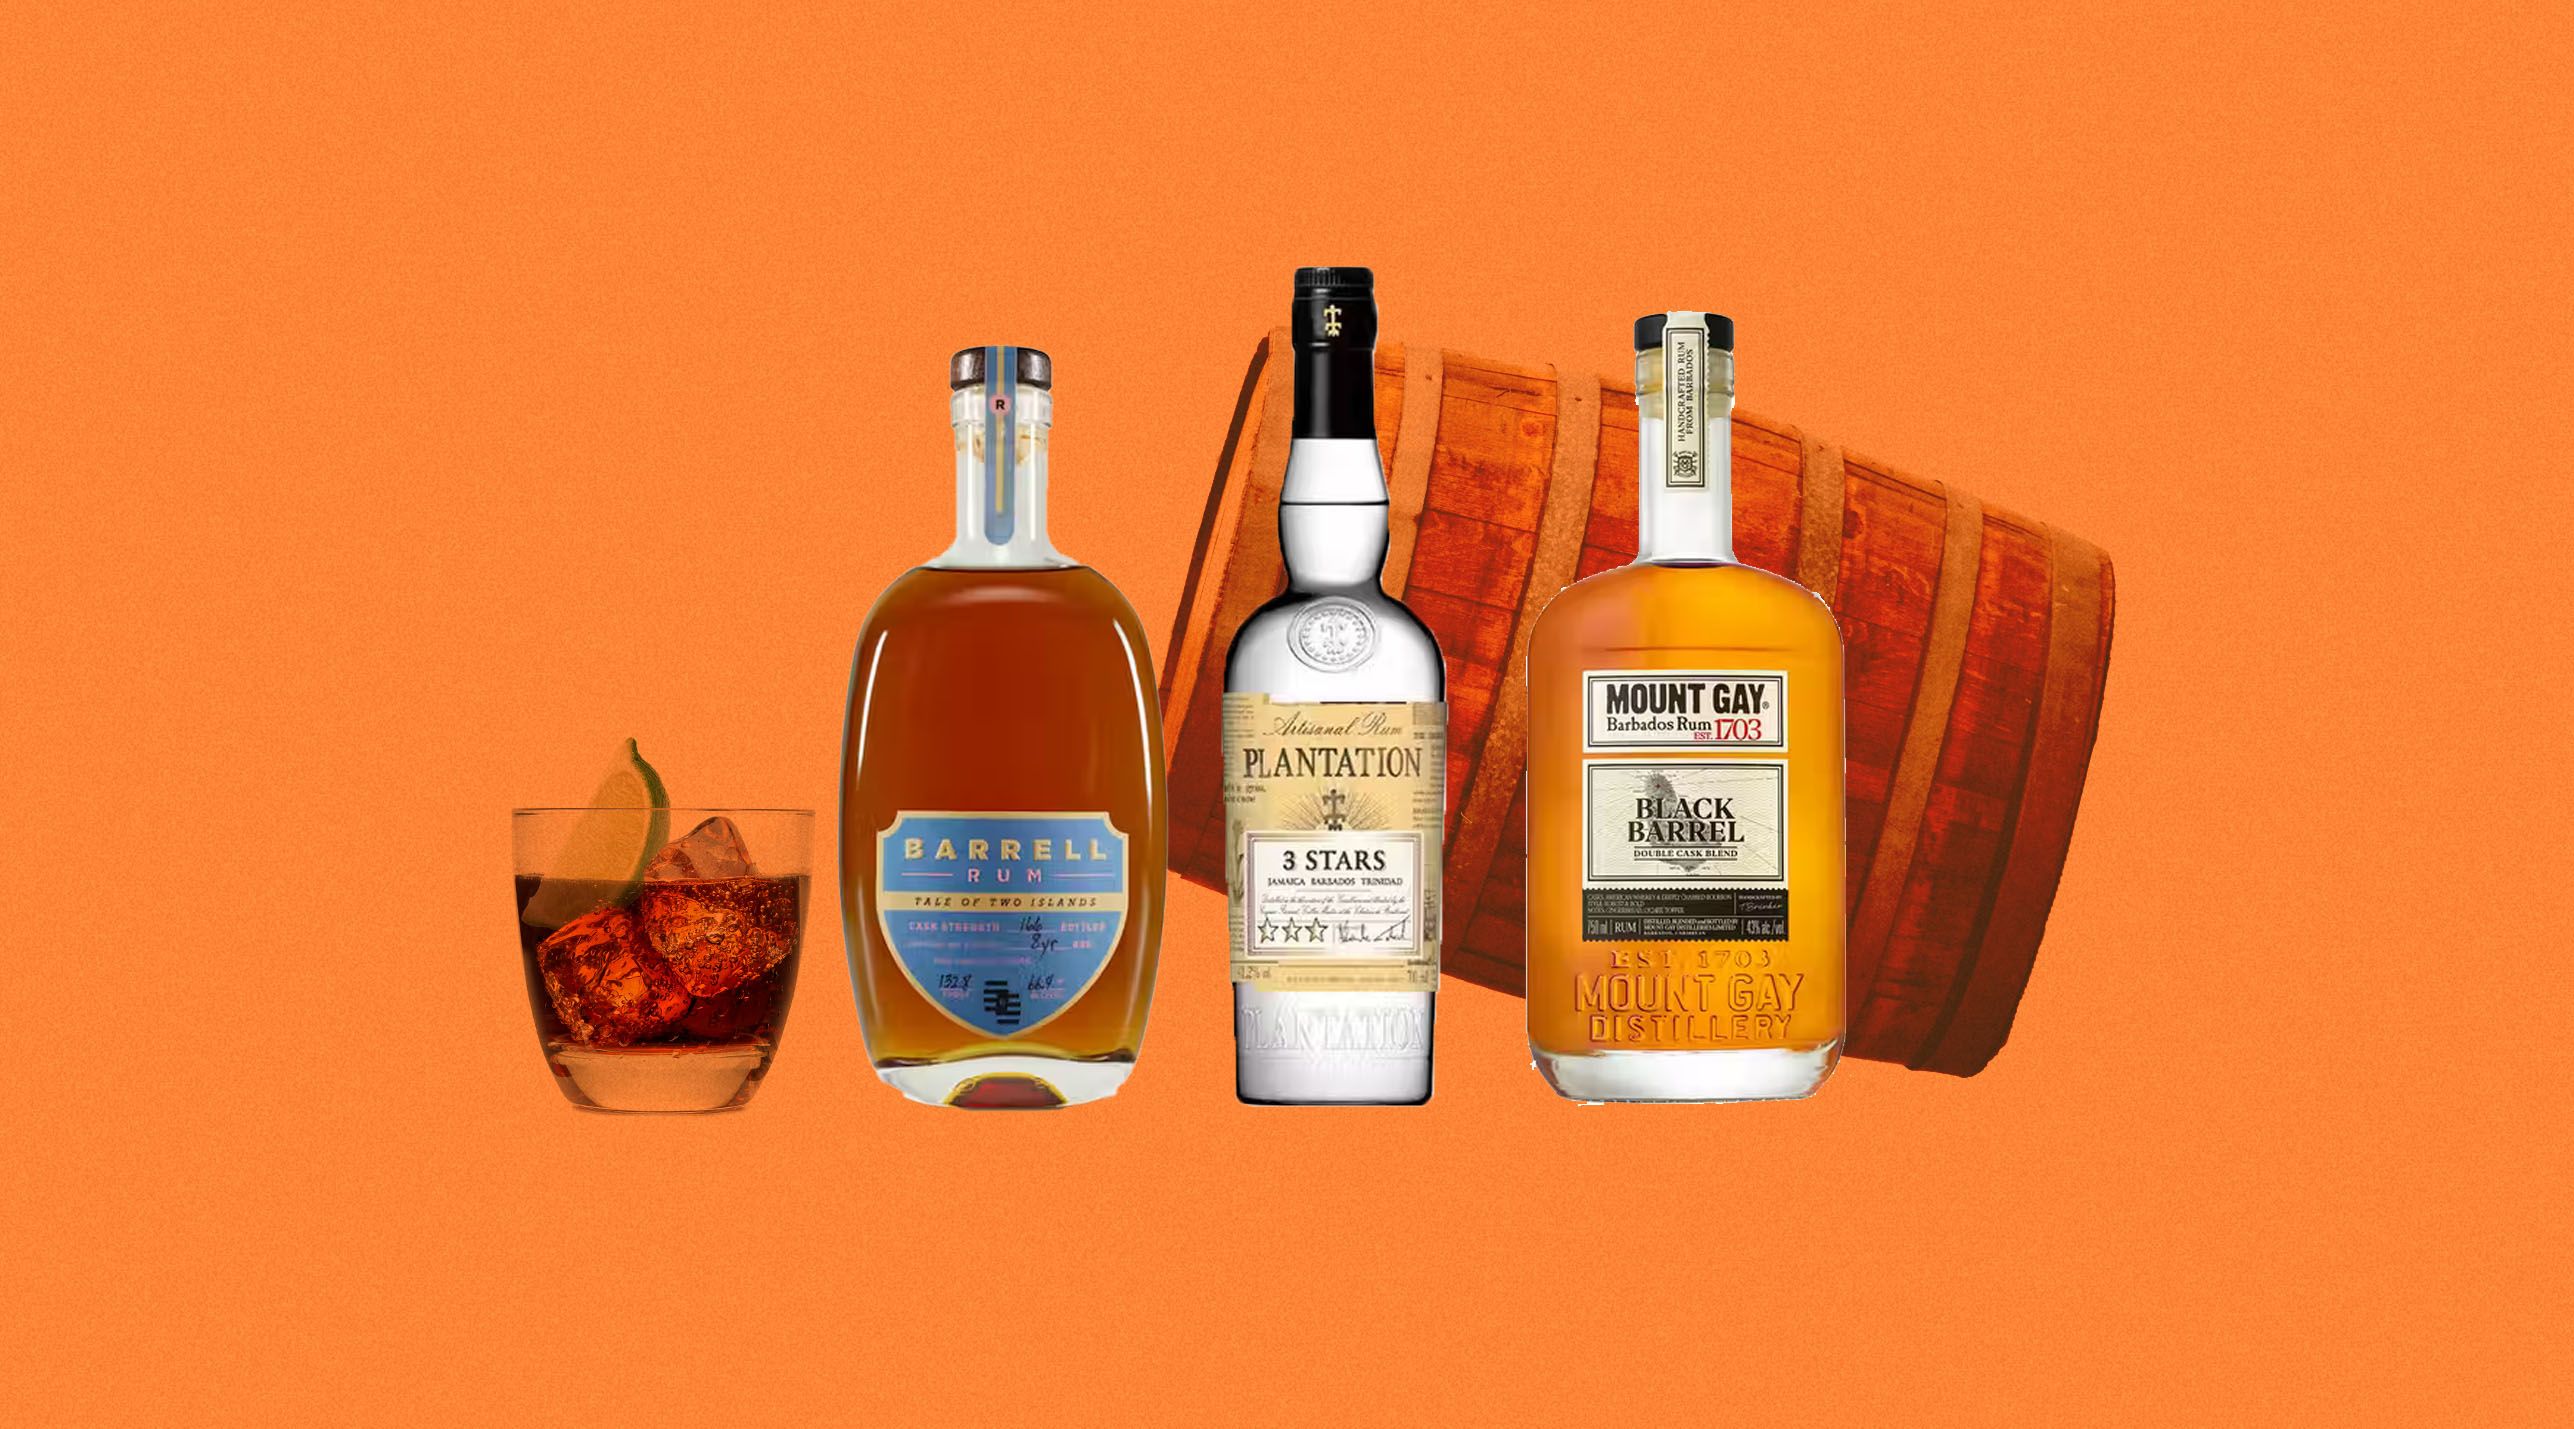 The Latest Trend in High-End Liquor Is Blending Them Together